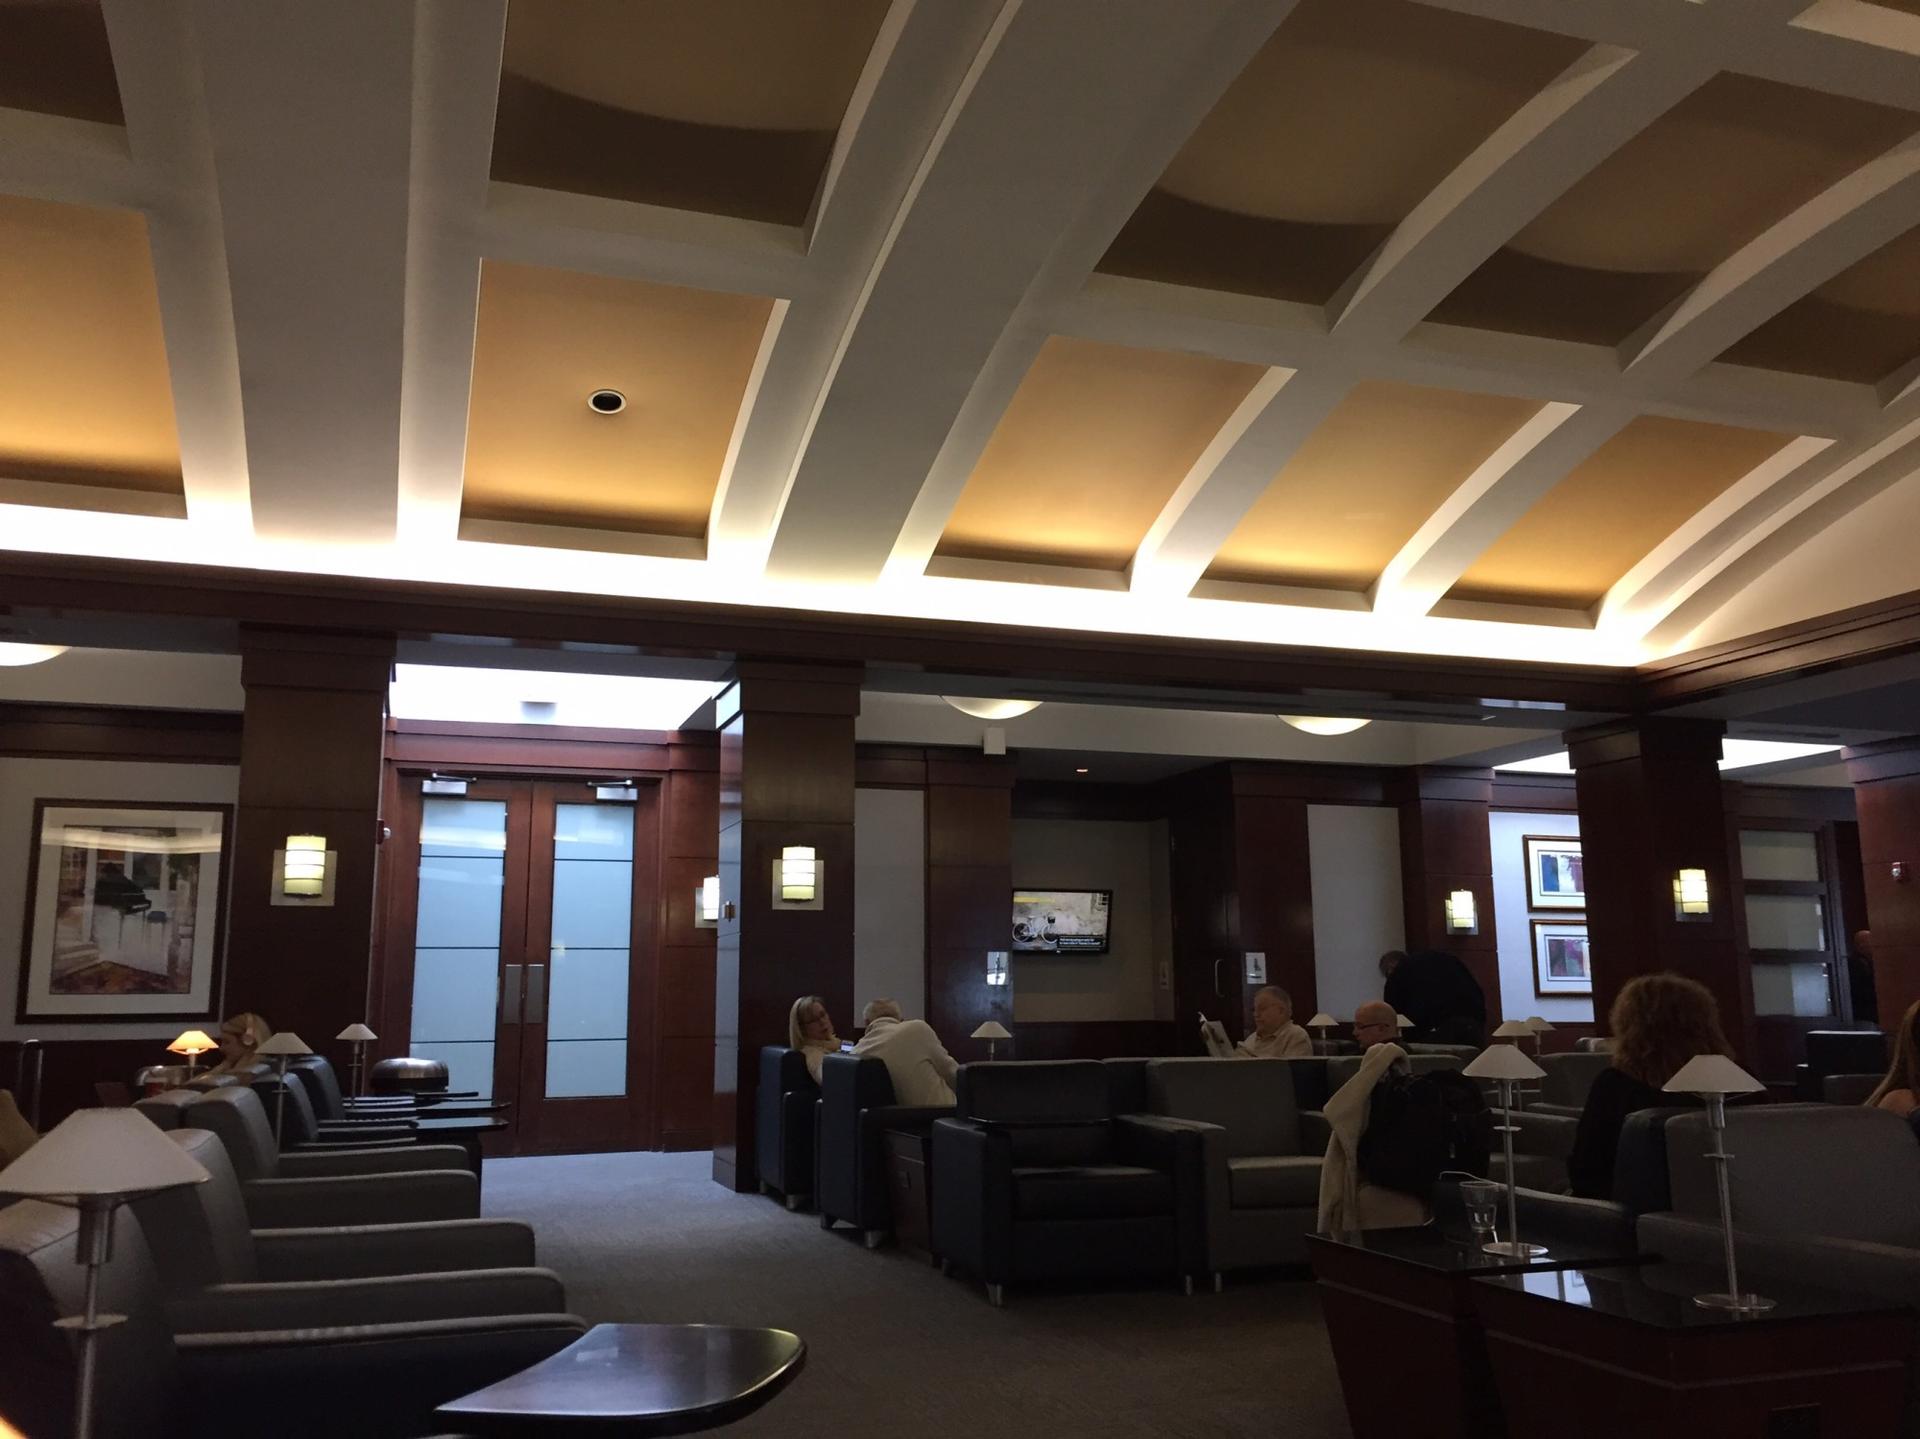 American Airlines Admirals Club image 21 of 37